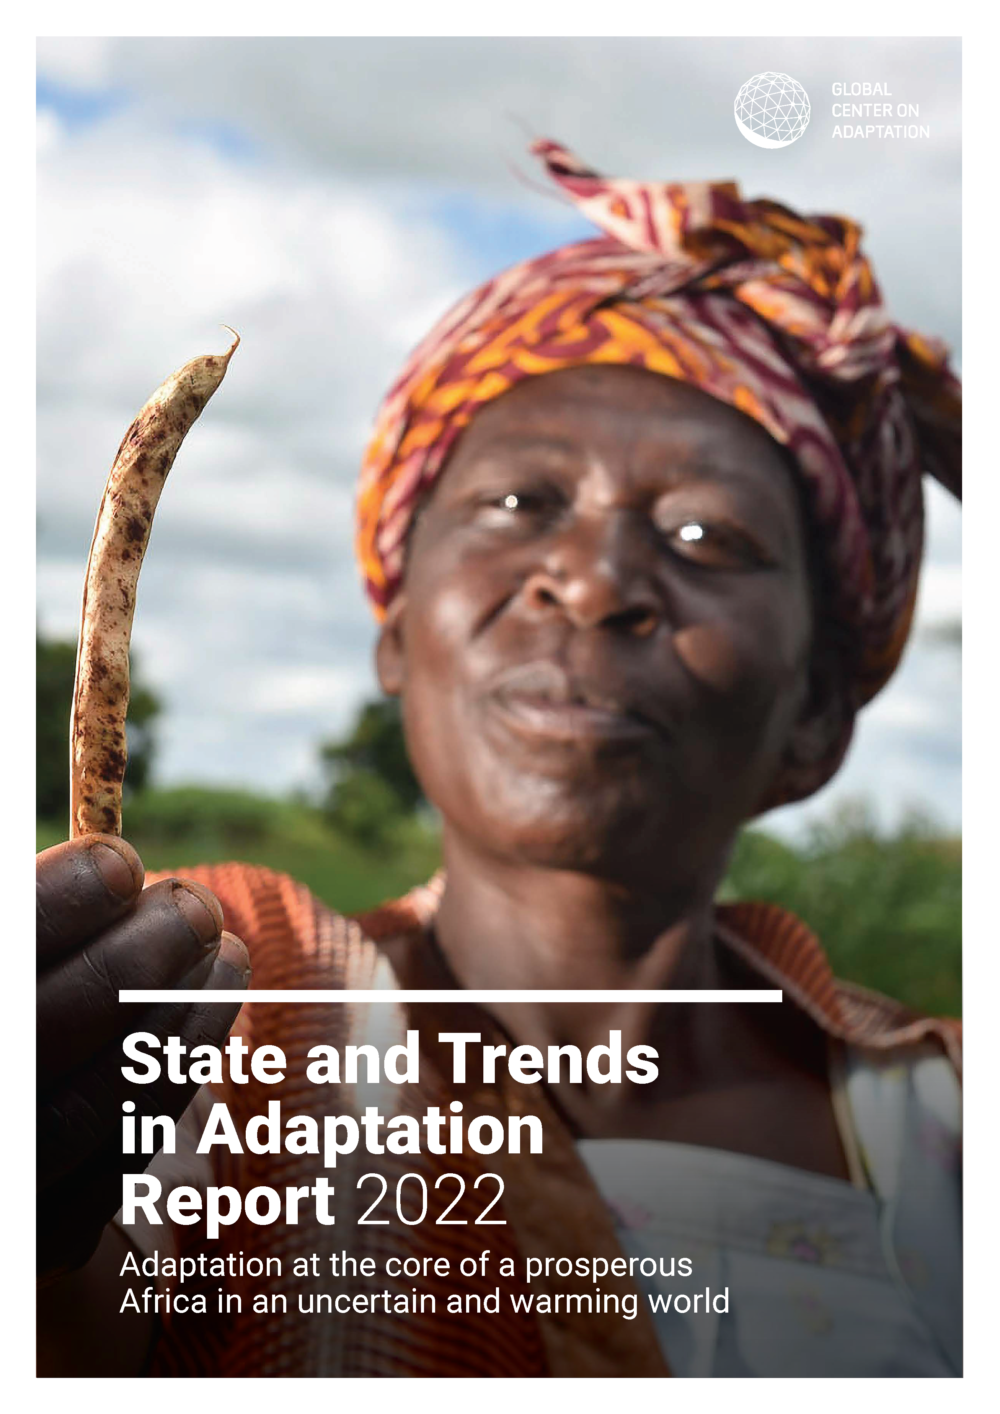 State and Trends in Adaptation Report 2022 - Global Center on Adaptation